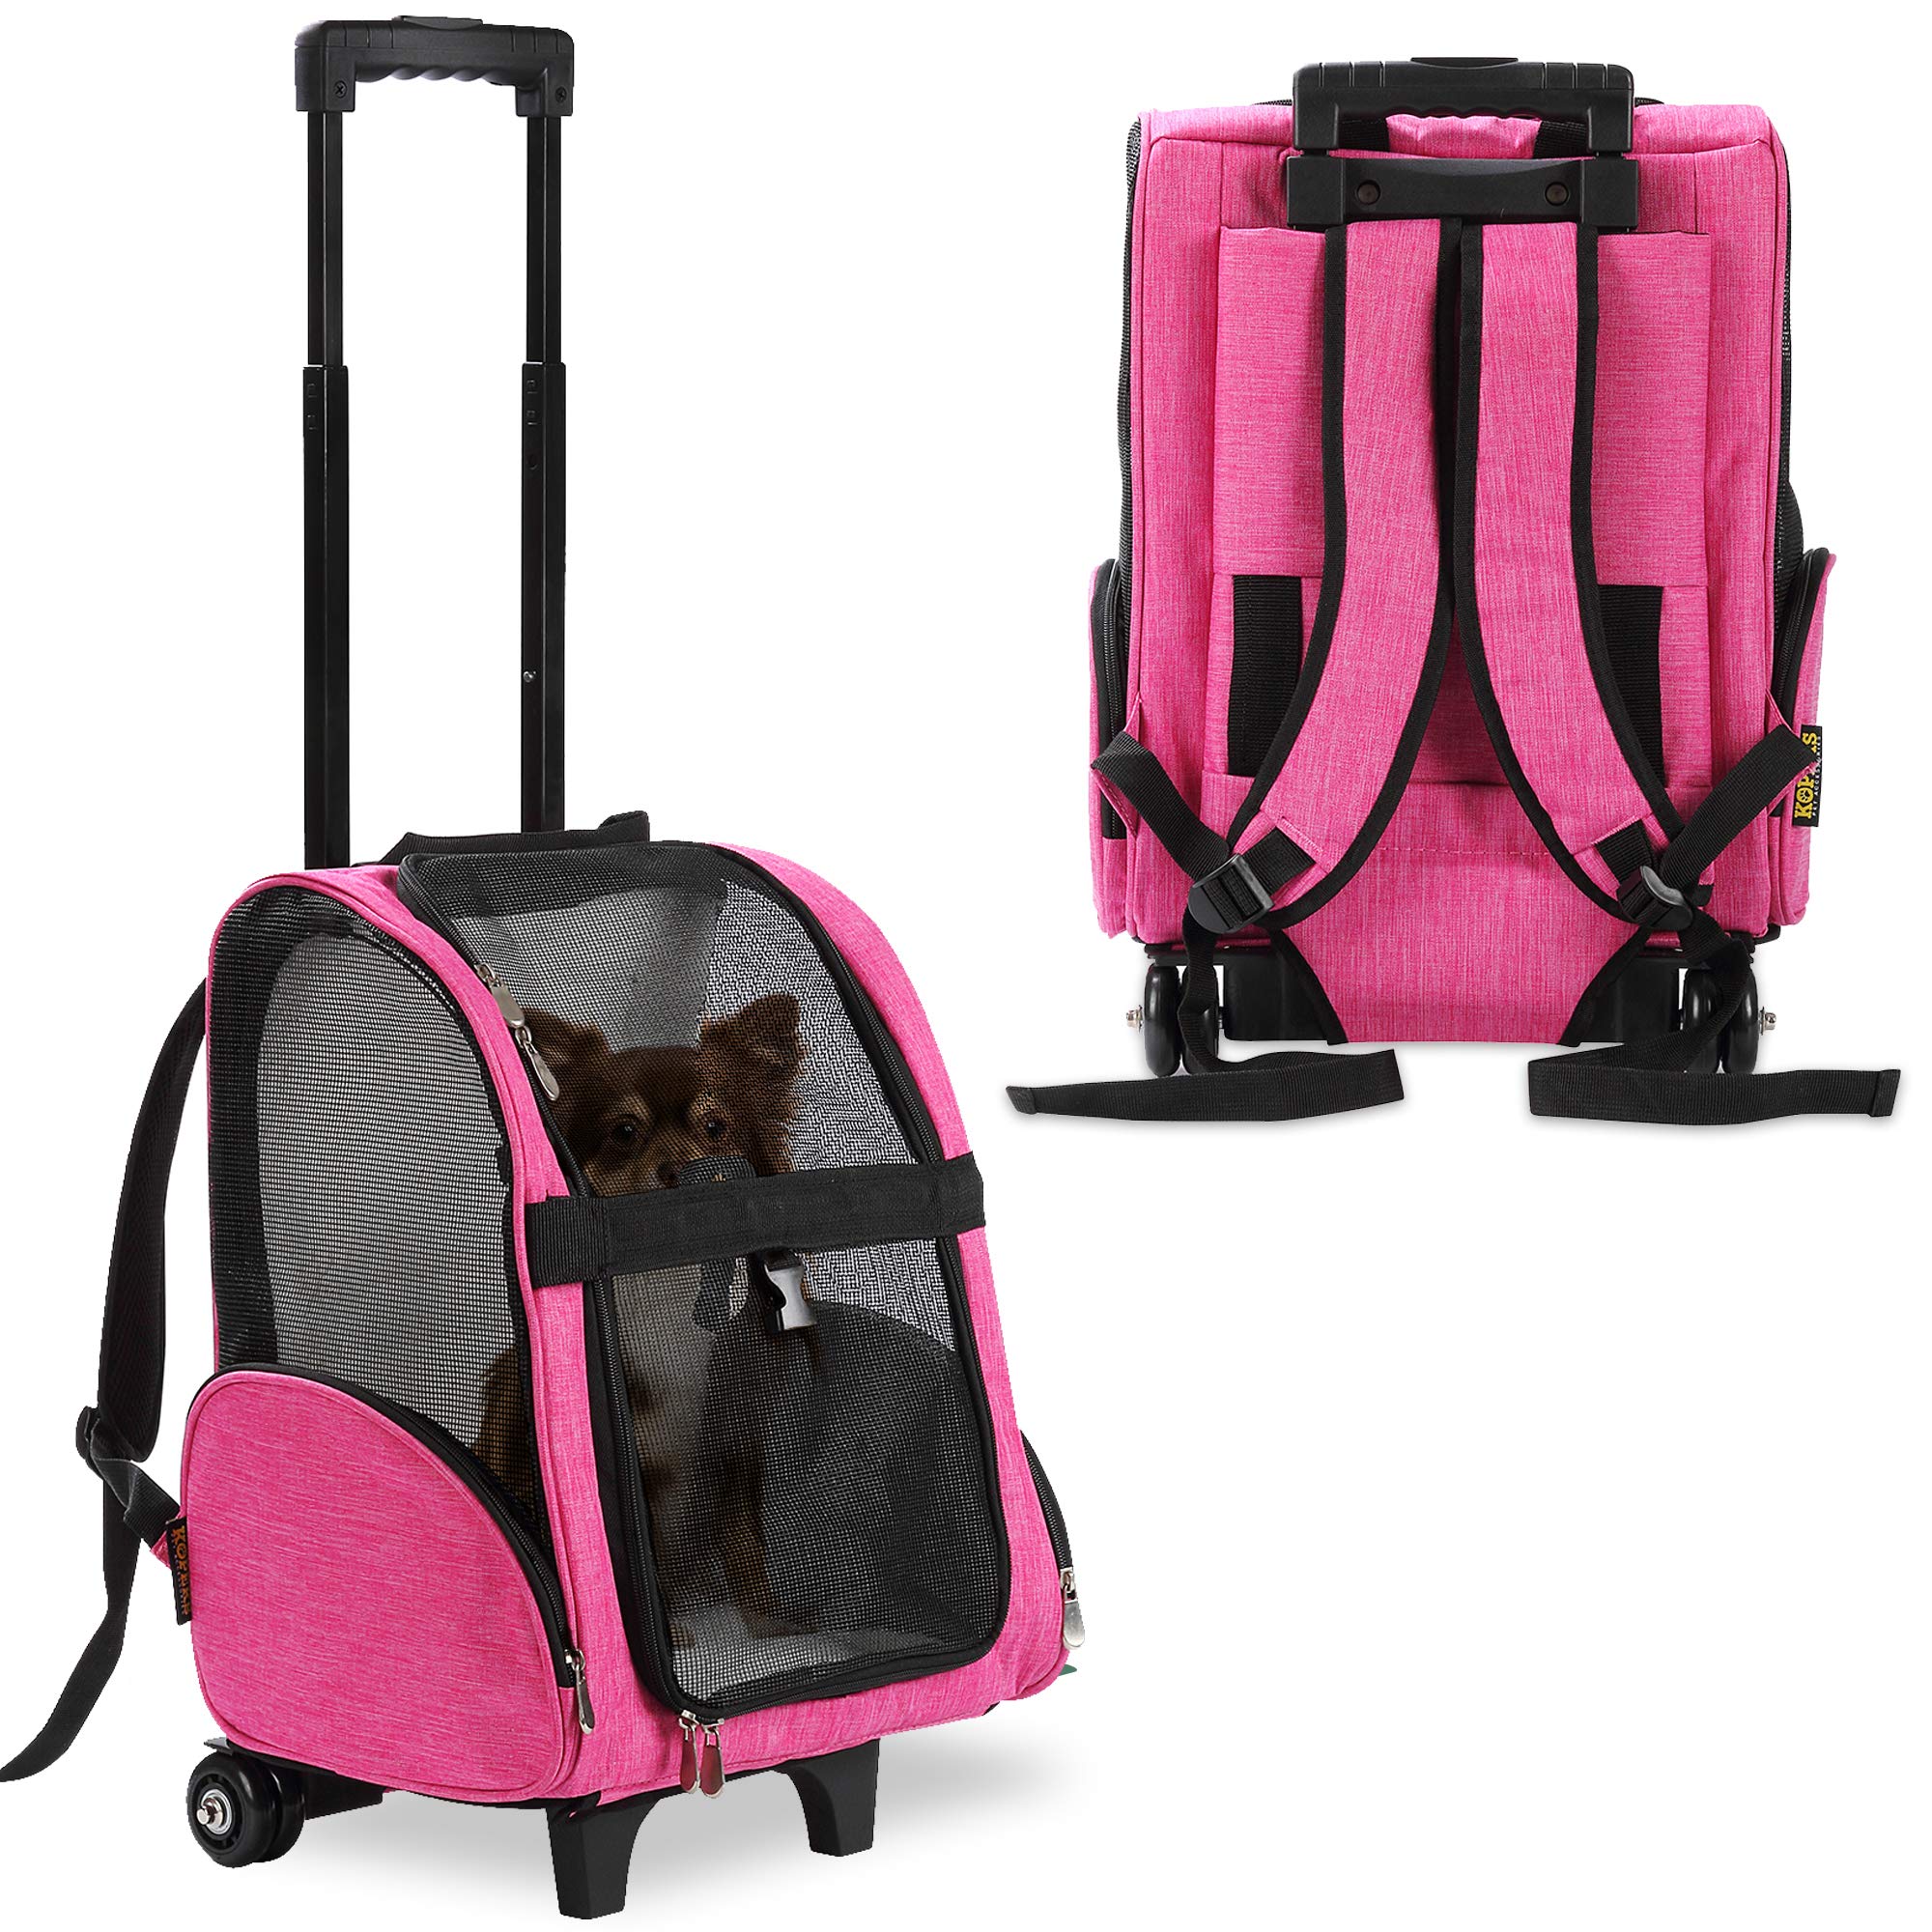 KOPEKS Deluxe Backpack Pet Travel carrier with Double Wheels - Heather Pink - Approved by Most Airlines